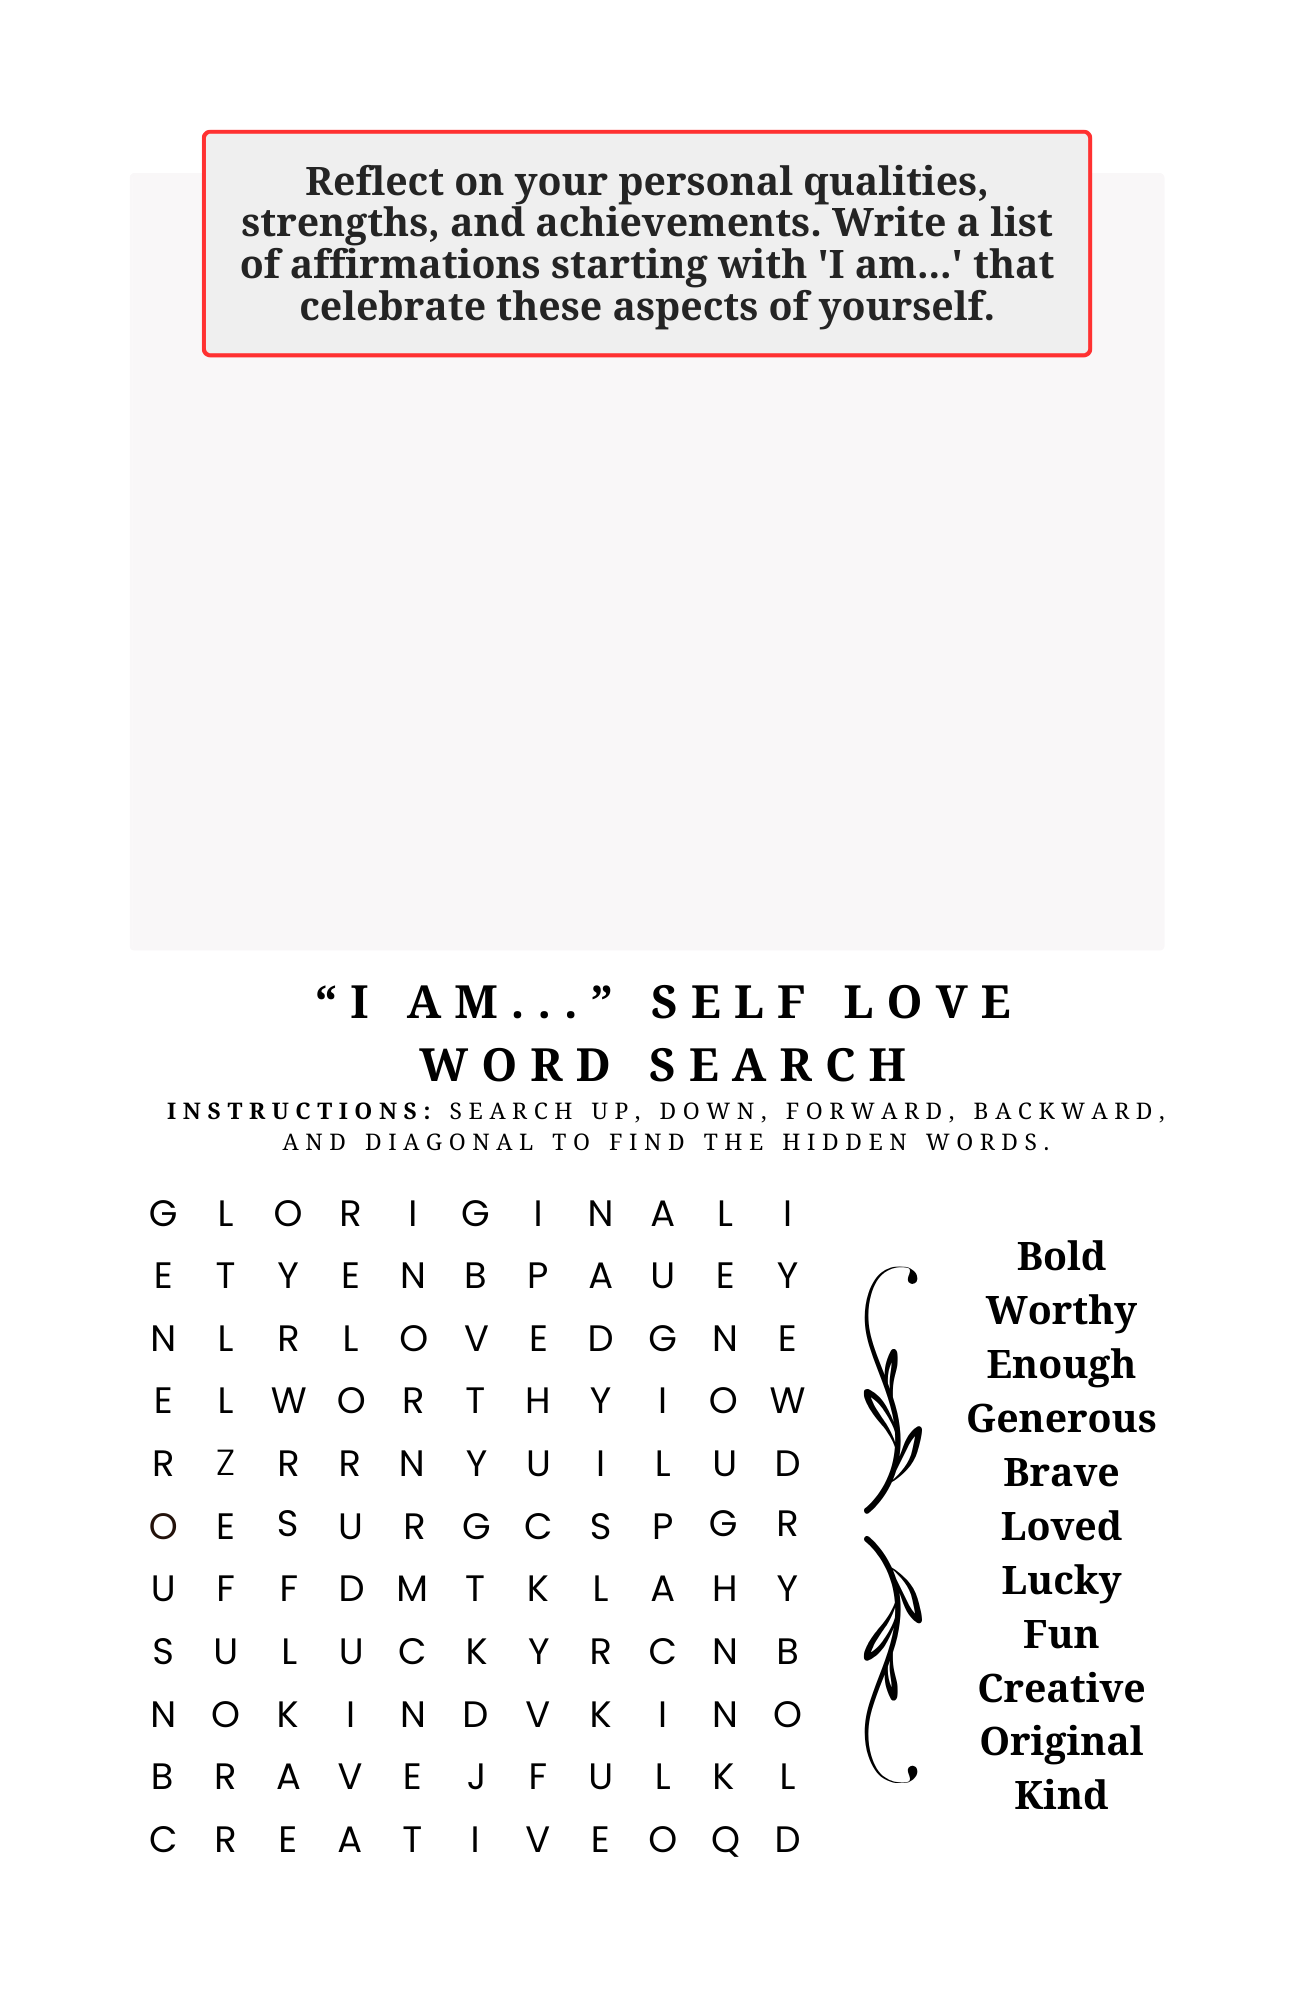 Love Notes To Self: A Guided Journal for Self-love and Healing by Amber James